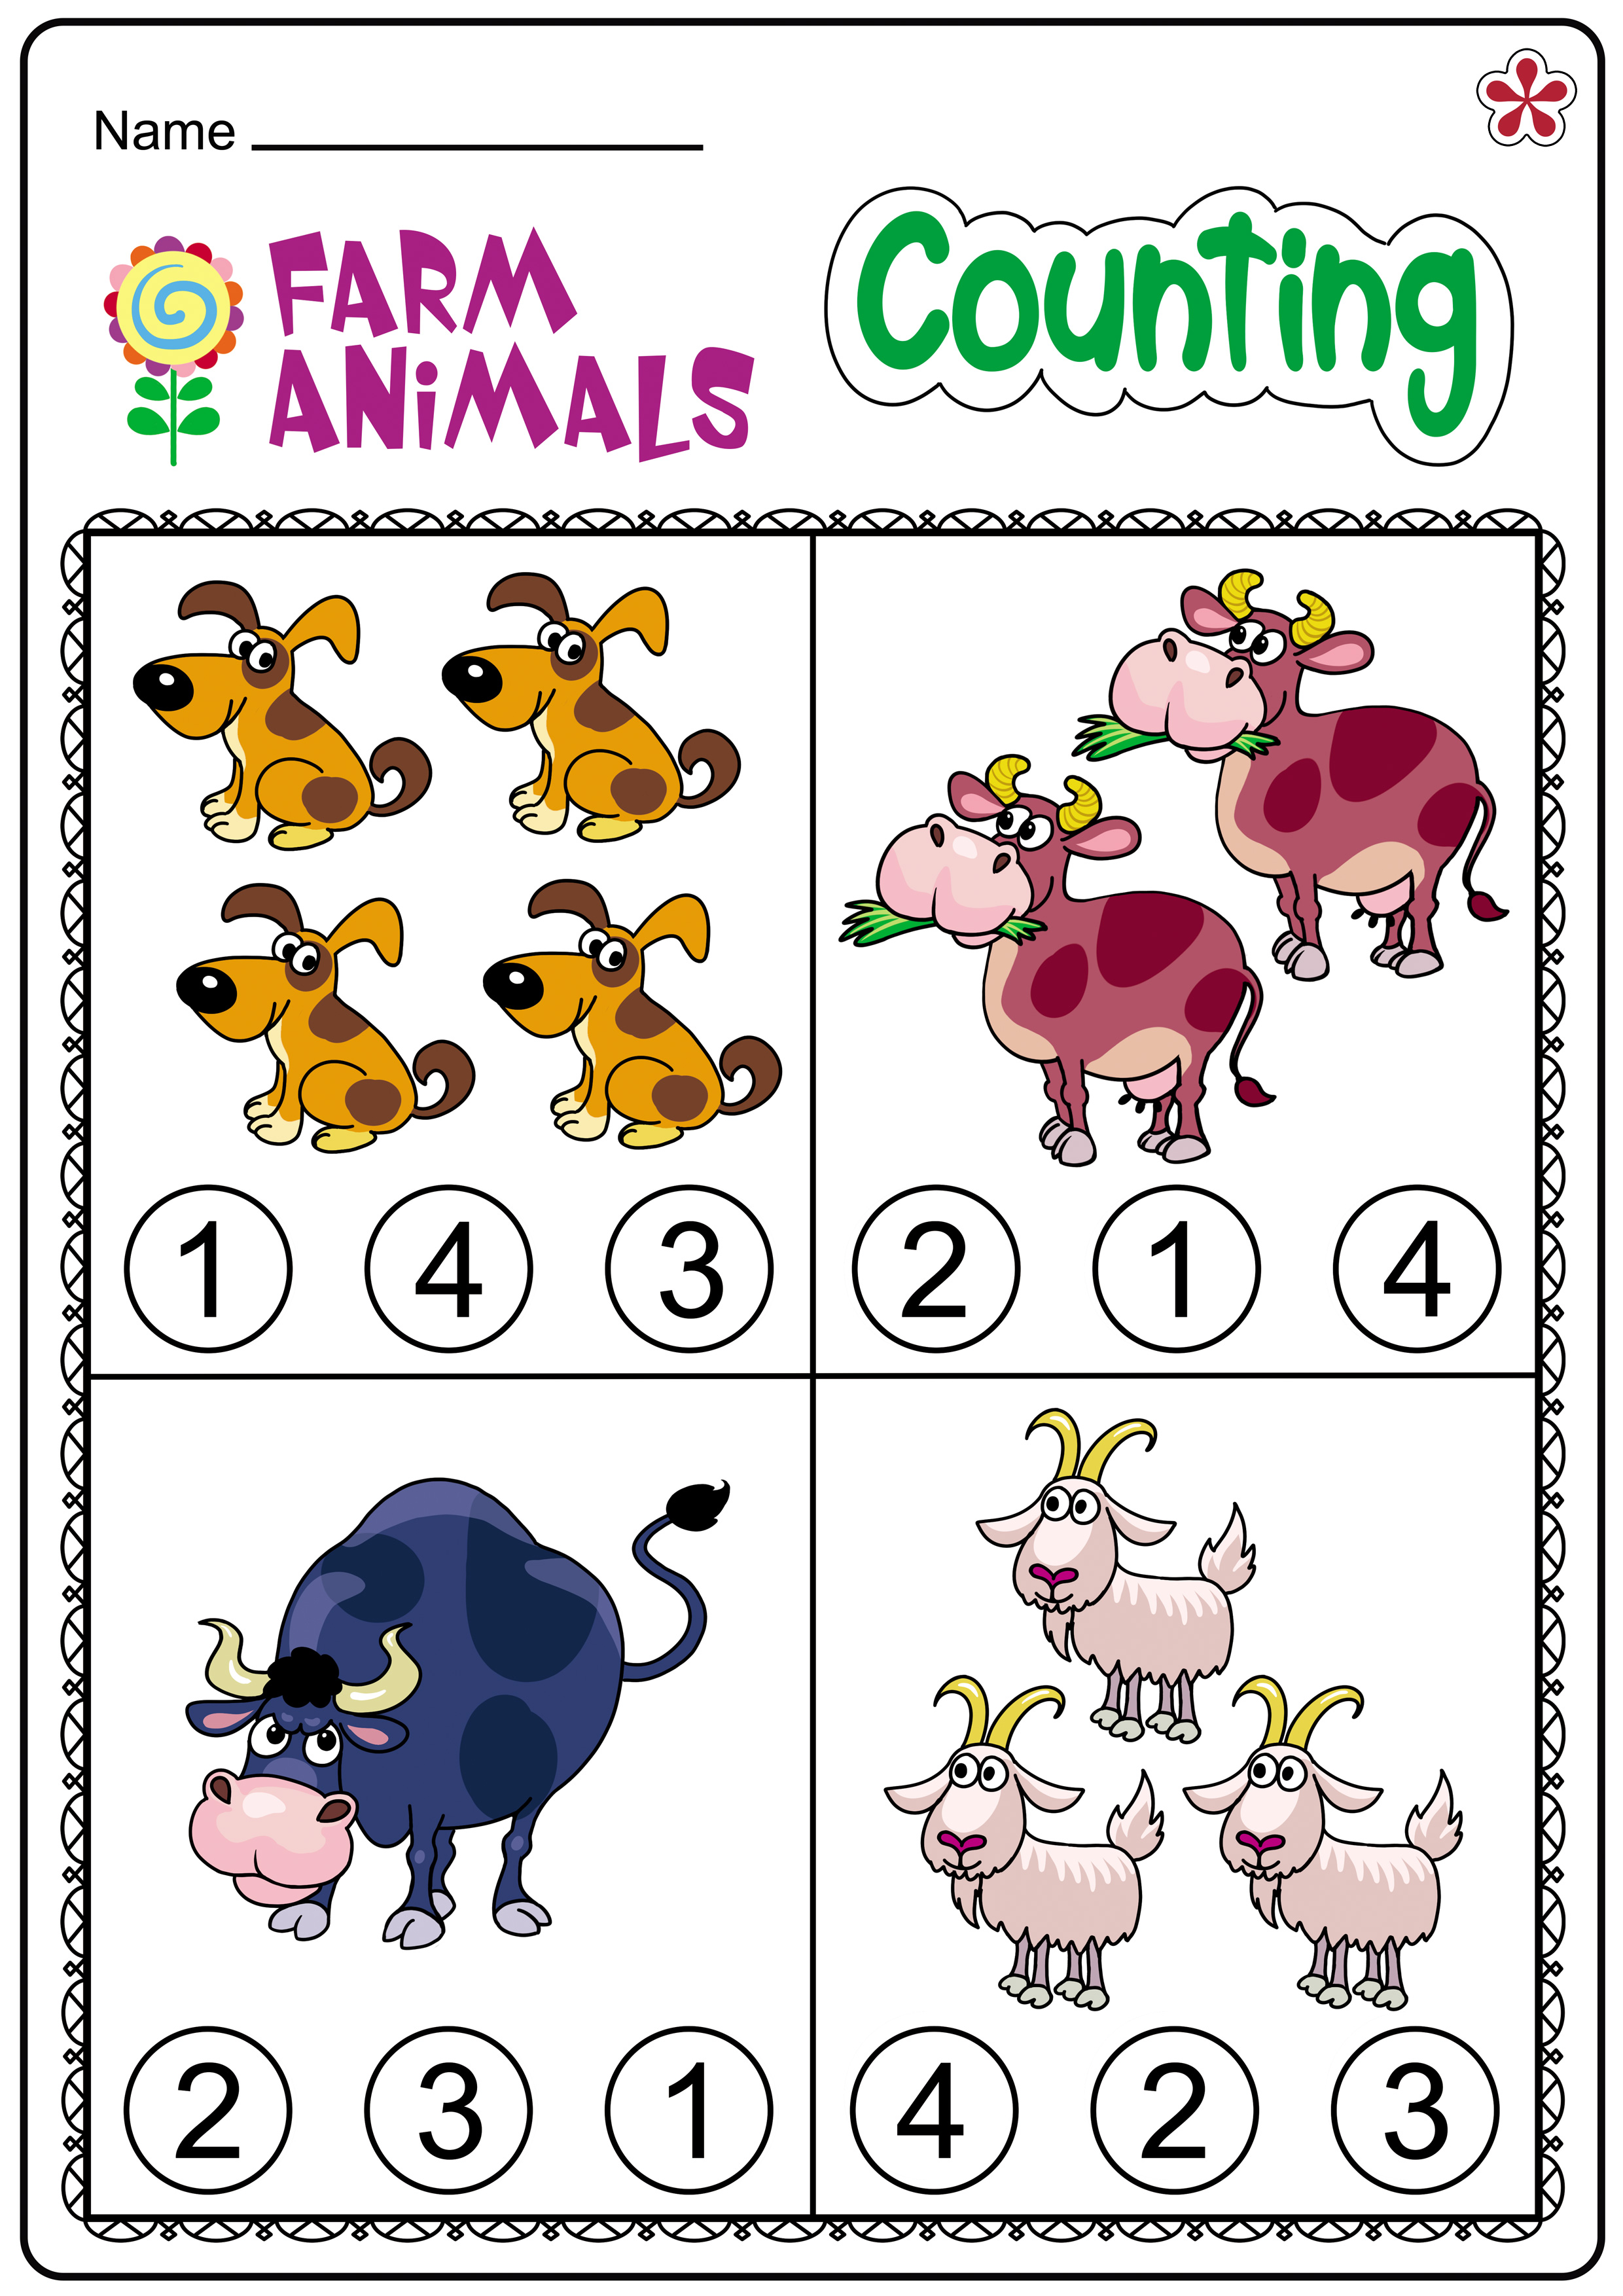 counting-farm-animals-worksheet